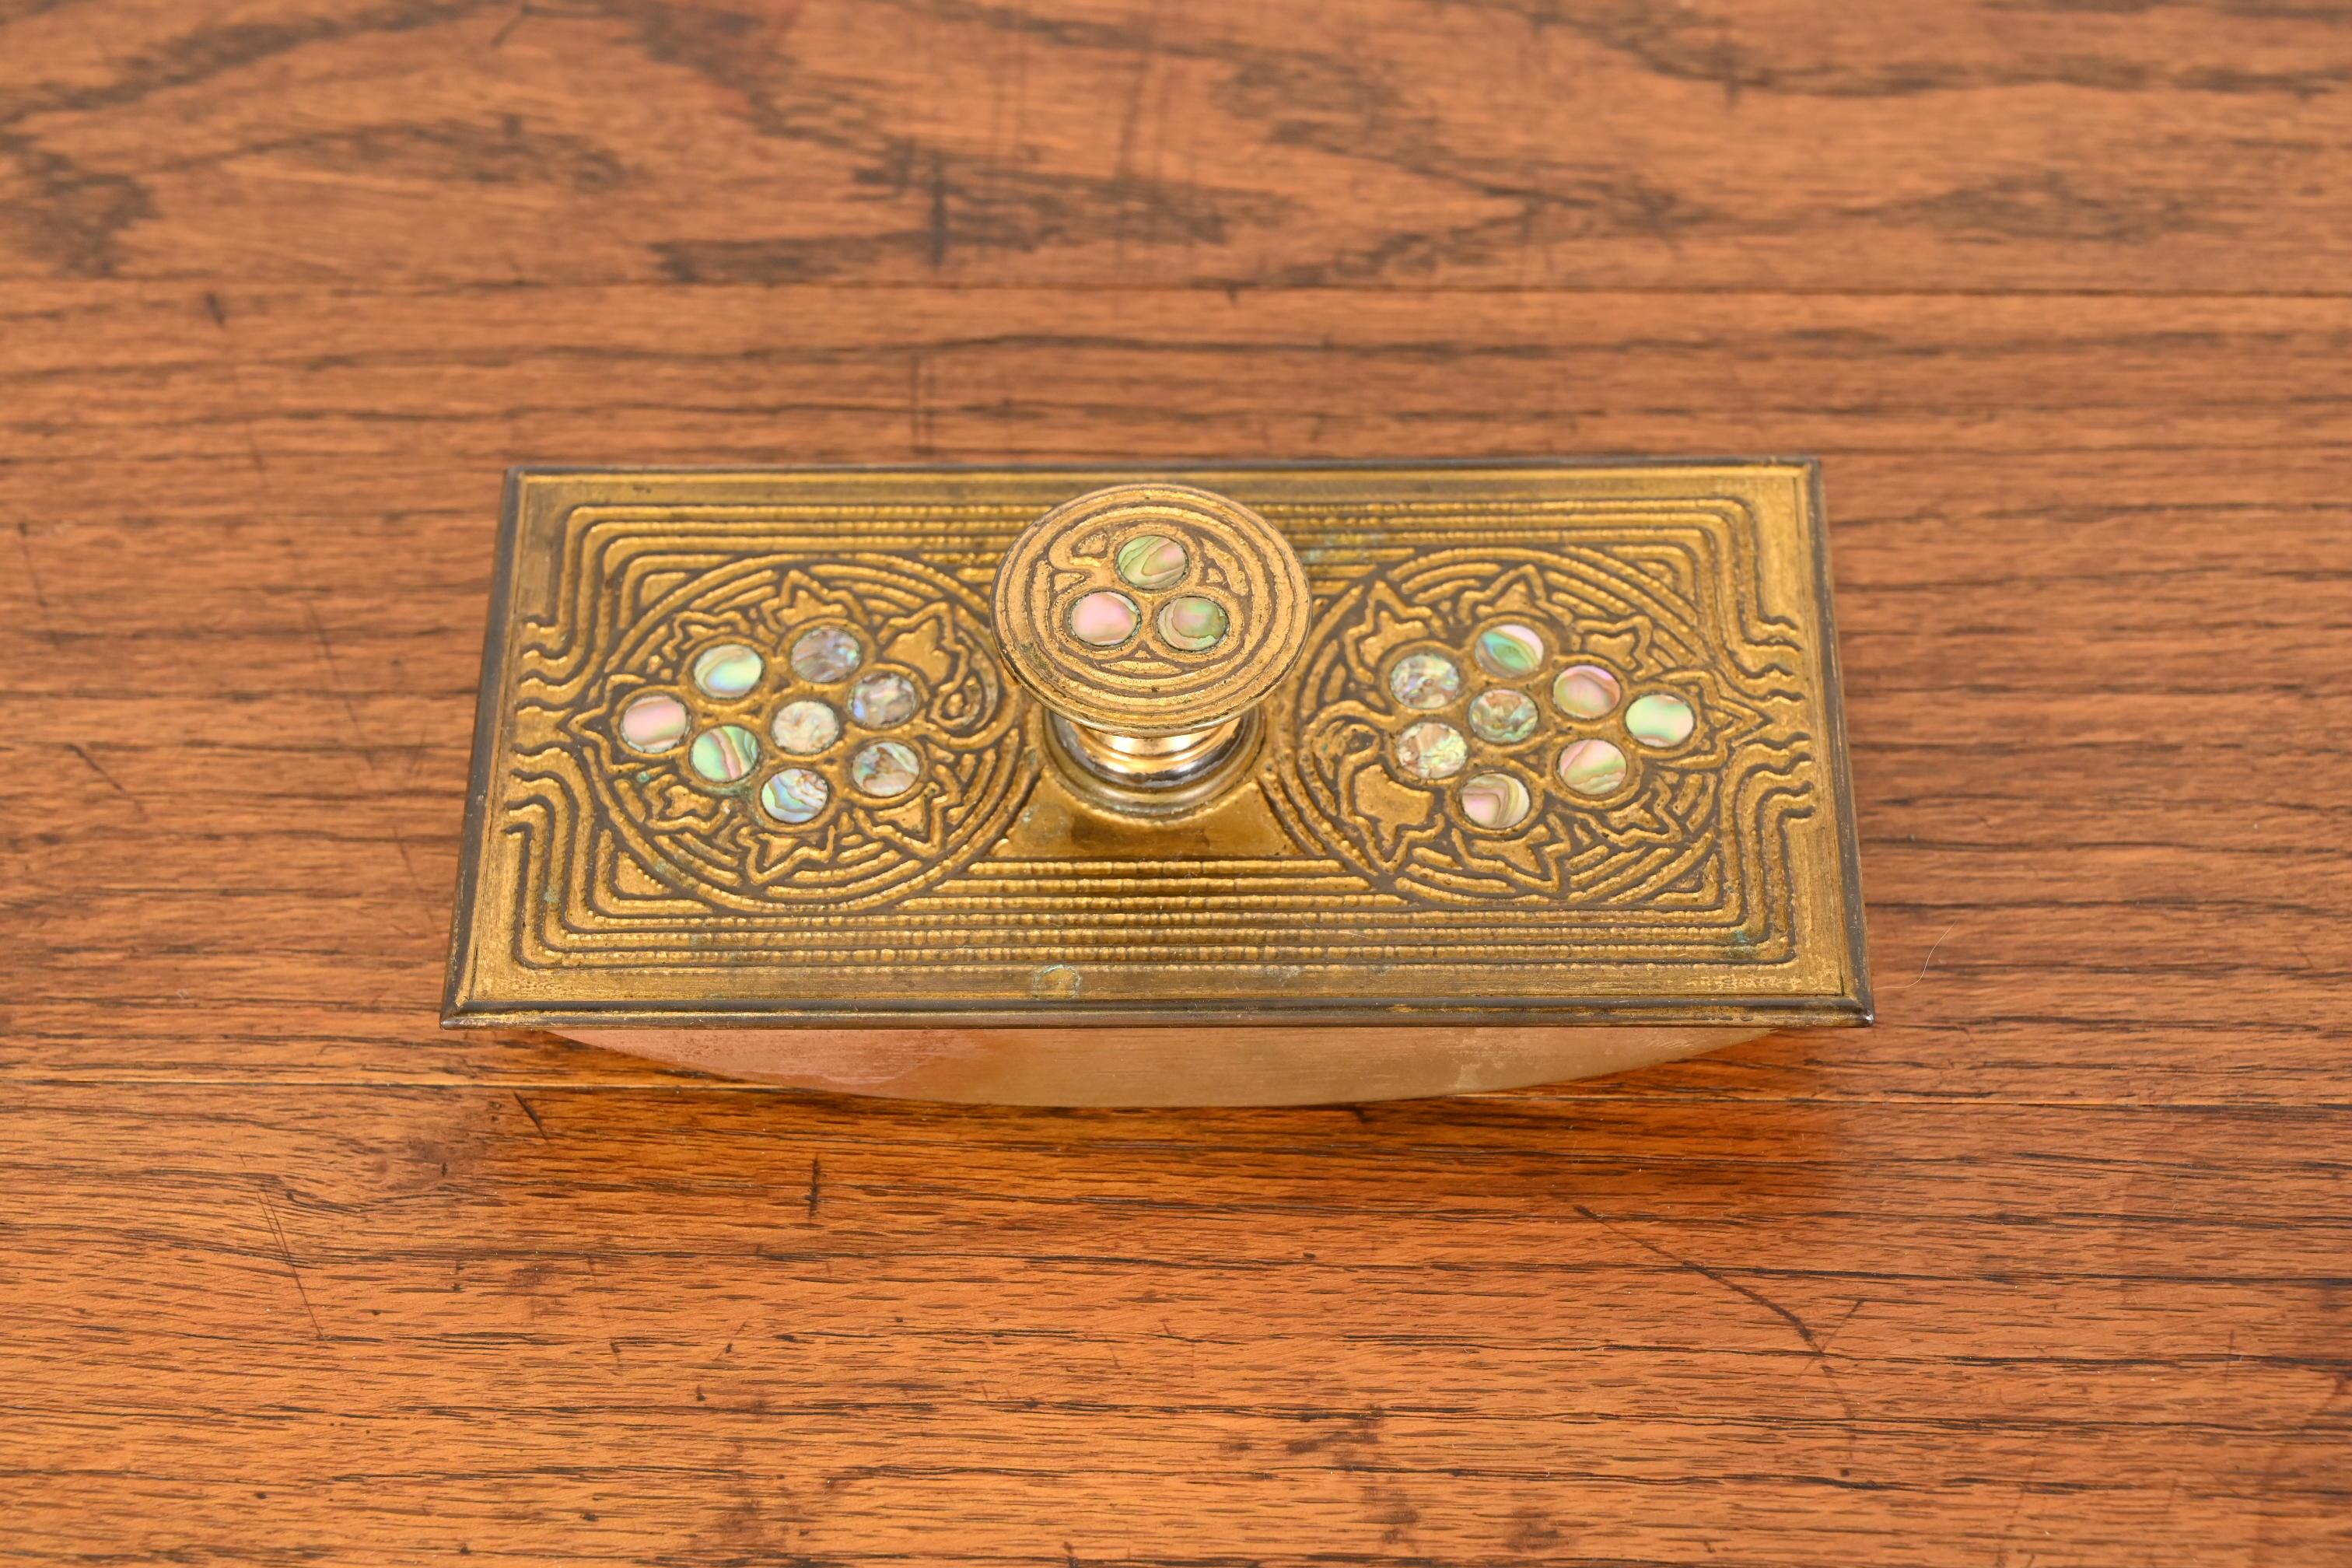 A gorgeous Art Nouveau or Art Deco period gilt bronze inlaid abalone rocker ink blotter

By Tiffany Studios

New York, USA, Early 20th Century

Measures: 6